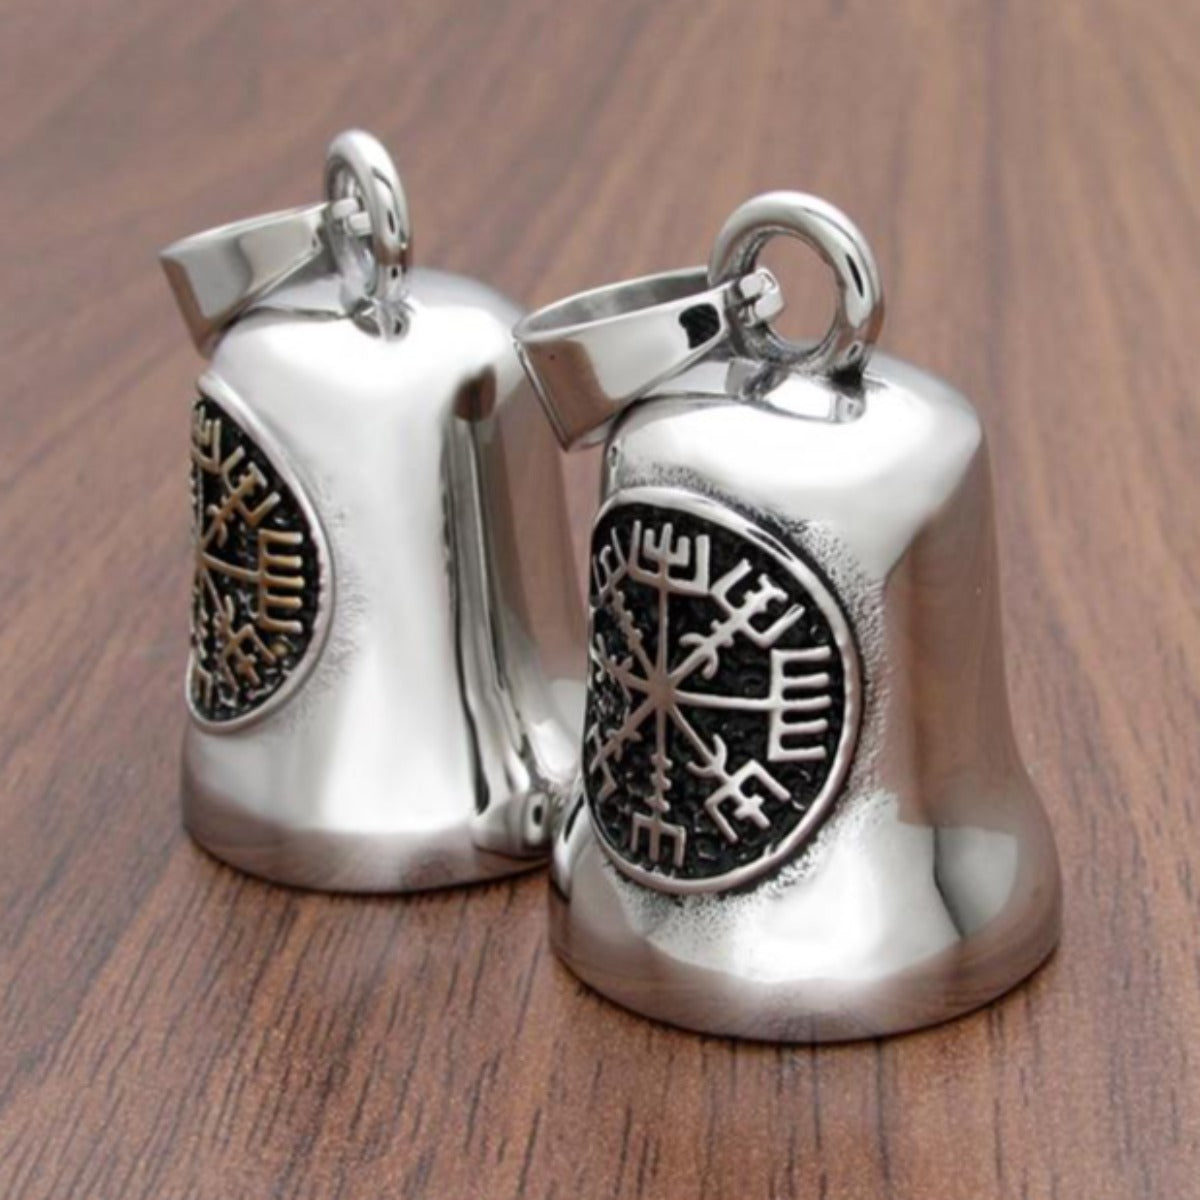 Pair of silver-colored Stainless Steel Viking Compass Gremlin Bell with intricate snowflake designs on a wooden surface.